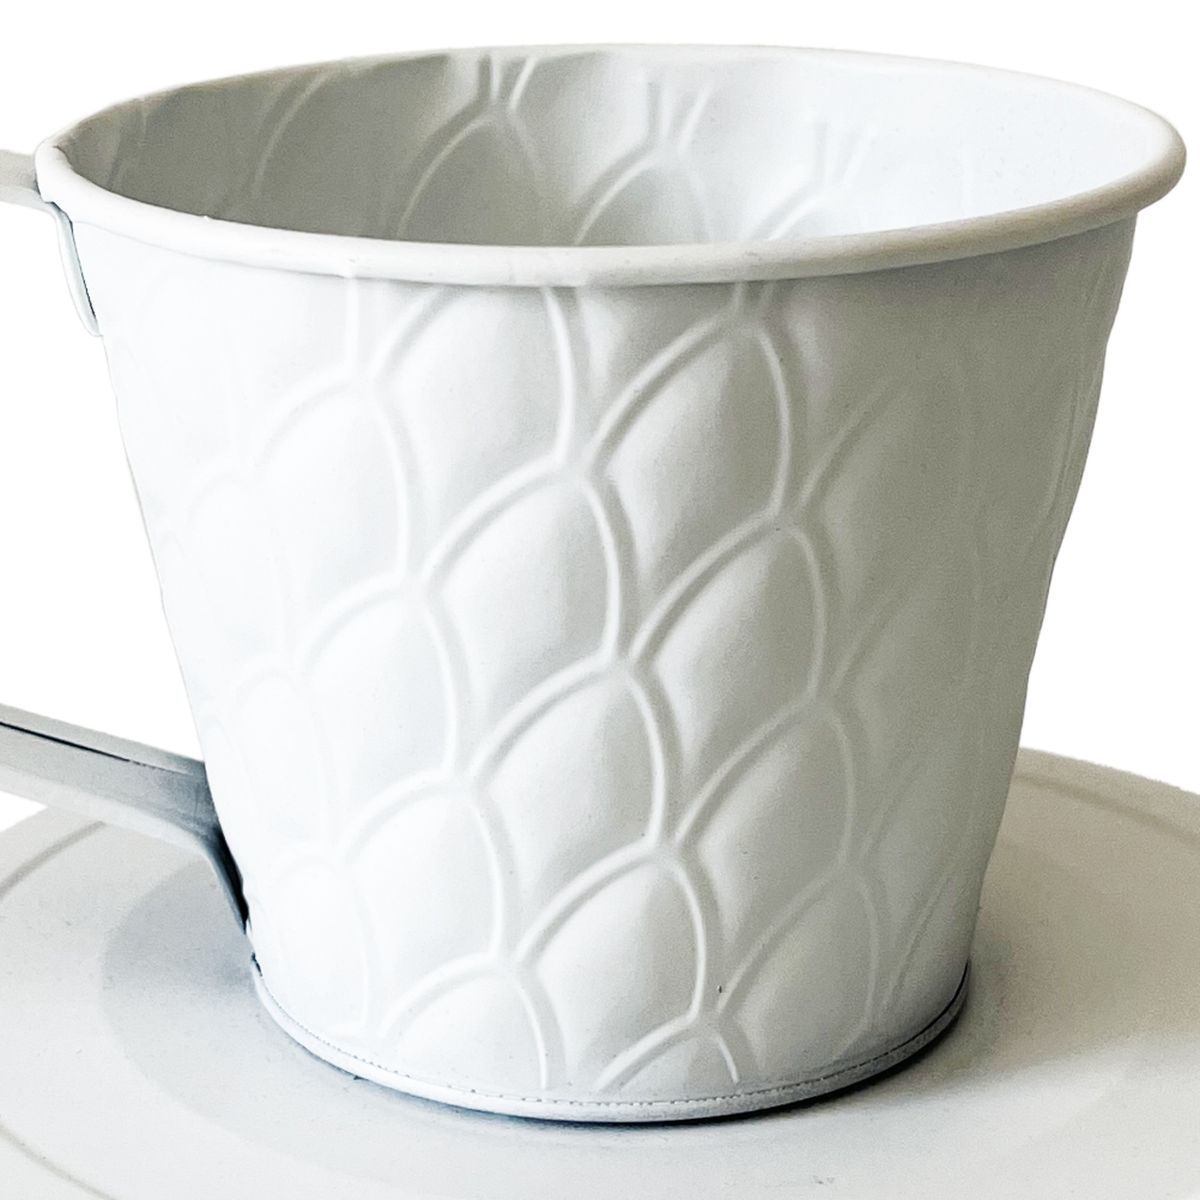 Flower pot cover in white metal in the shape of a cup